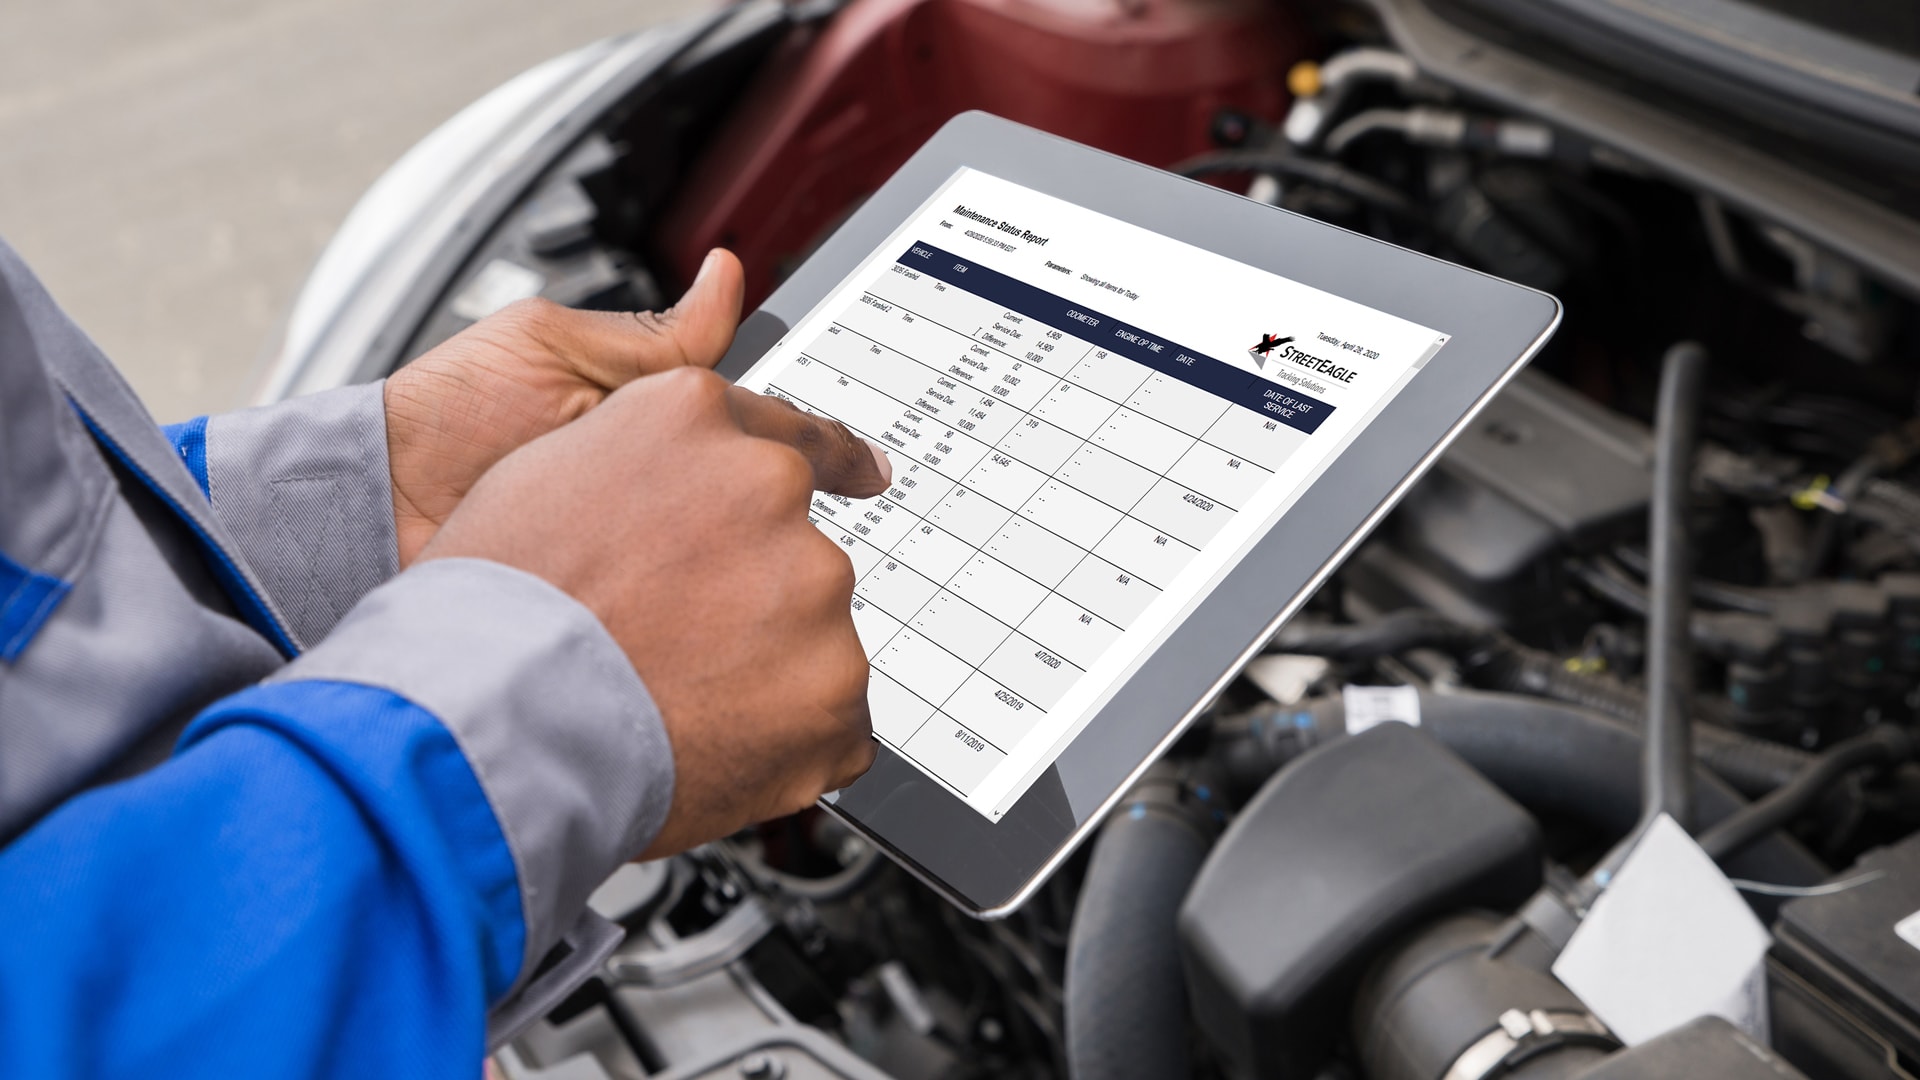 Proactive monitoring of every vehicle's performance and utilization, from anywhere